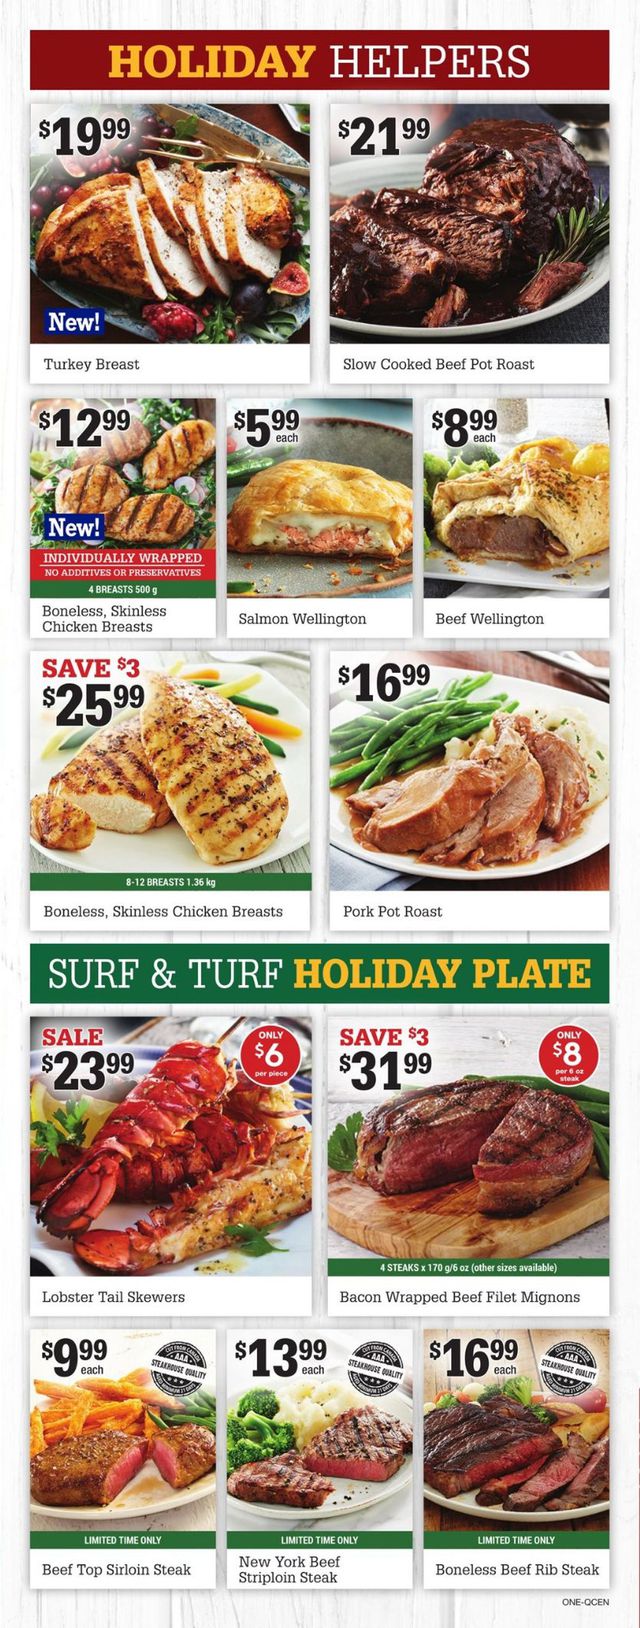 M&M Food Market Flyer from 12/24/2020